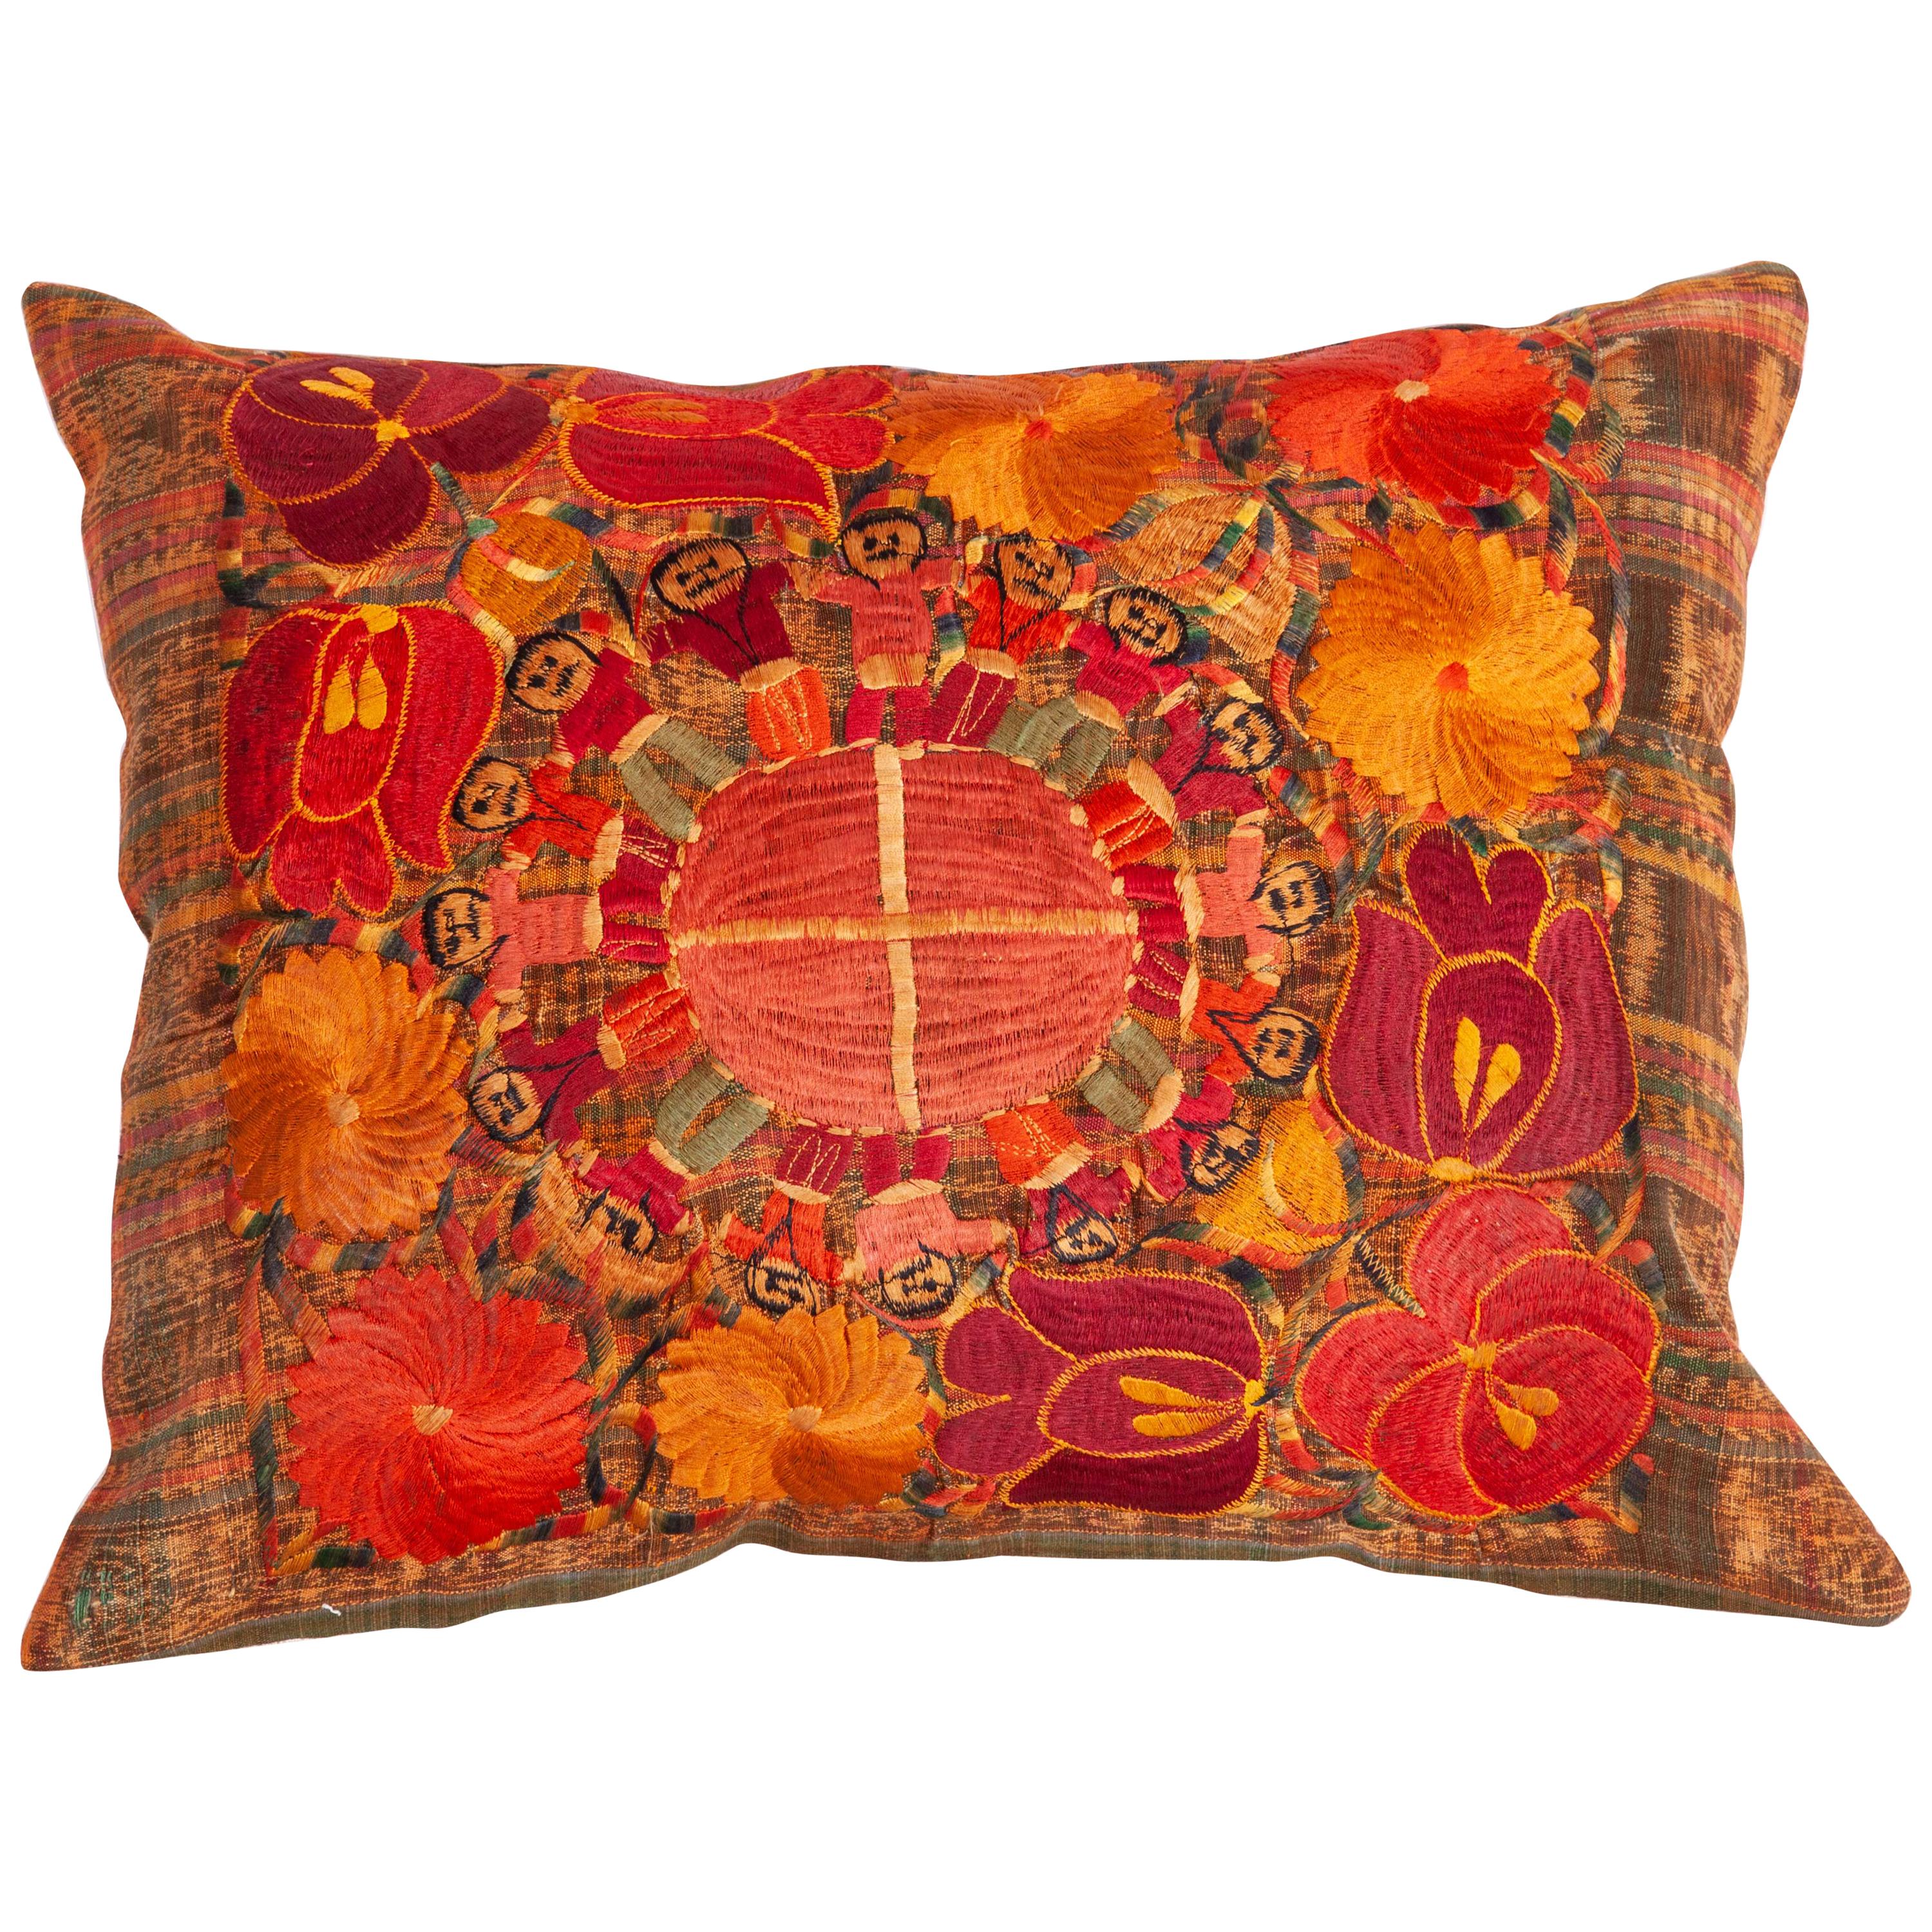 Vintage Pillow Case Fashioned from a Guatamalan Huipil Embroidery, 1960s